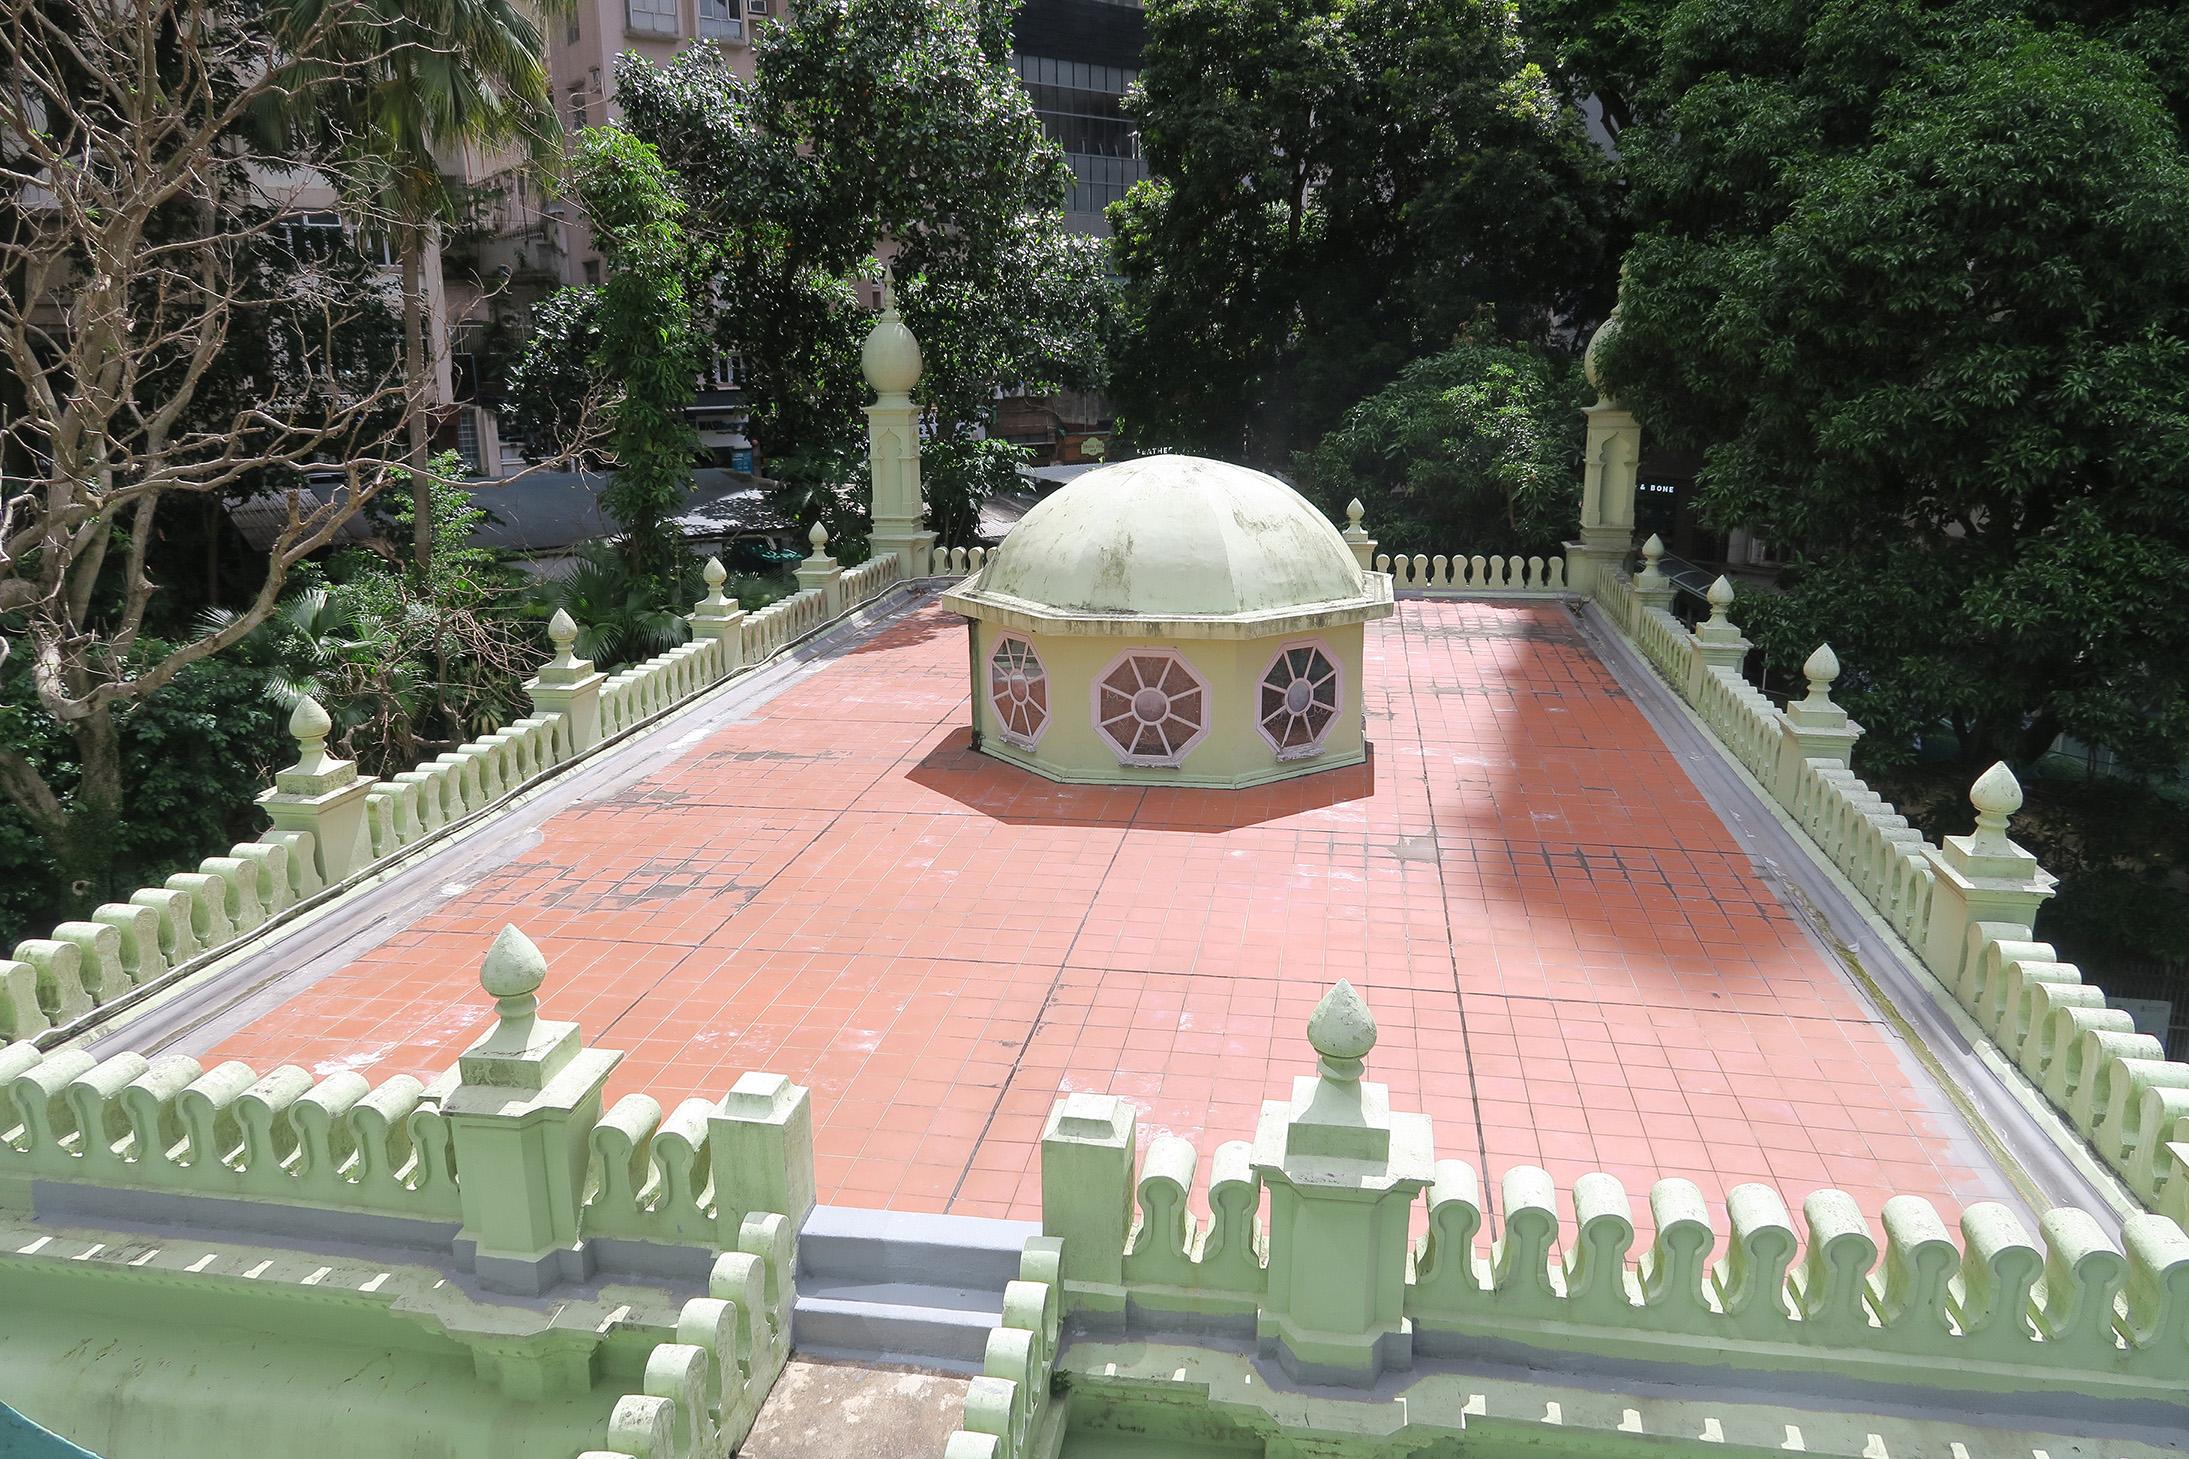 The Government today (May 20) gazetted a notice announcing that the Antiquities Authority (i.e. the Secretary for Development) has declared Jamia Mosque and Hong Kong City Hall in Central, and Lui Seng Chun in Mong Kok as monuments under the Antiquities and Monuments Ordinance. Photo shows the roof parapets of the prayer hall of Jamia Mosque. They are decorated by rounded merlons with pedestals crowned by finial at intervals.